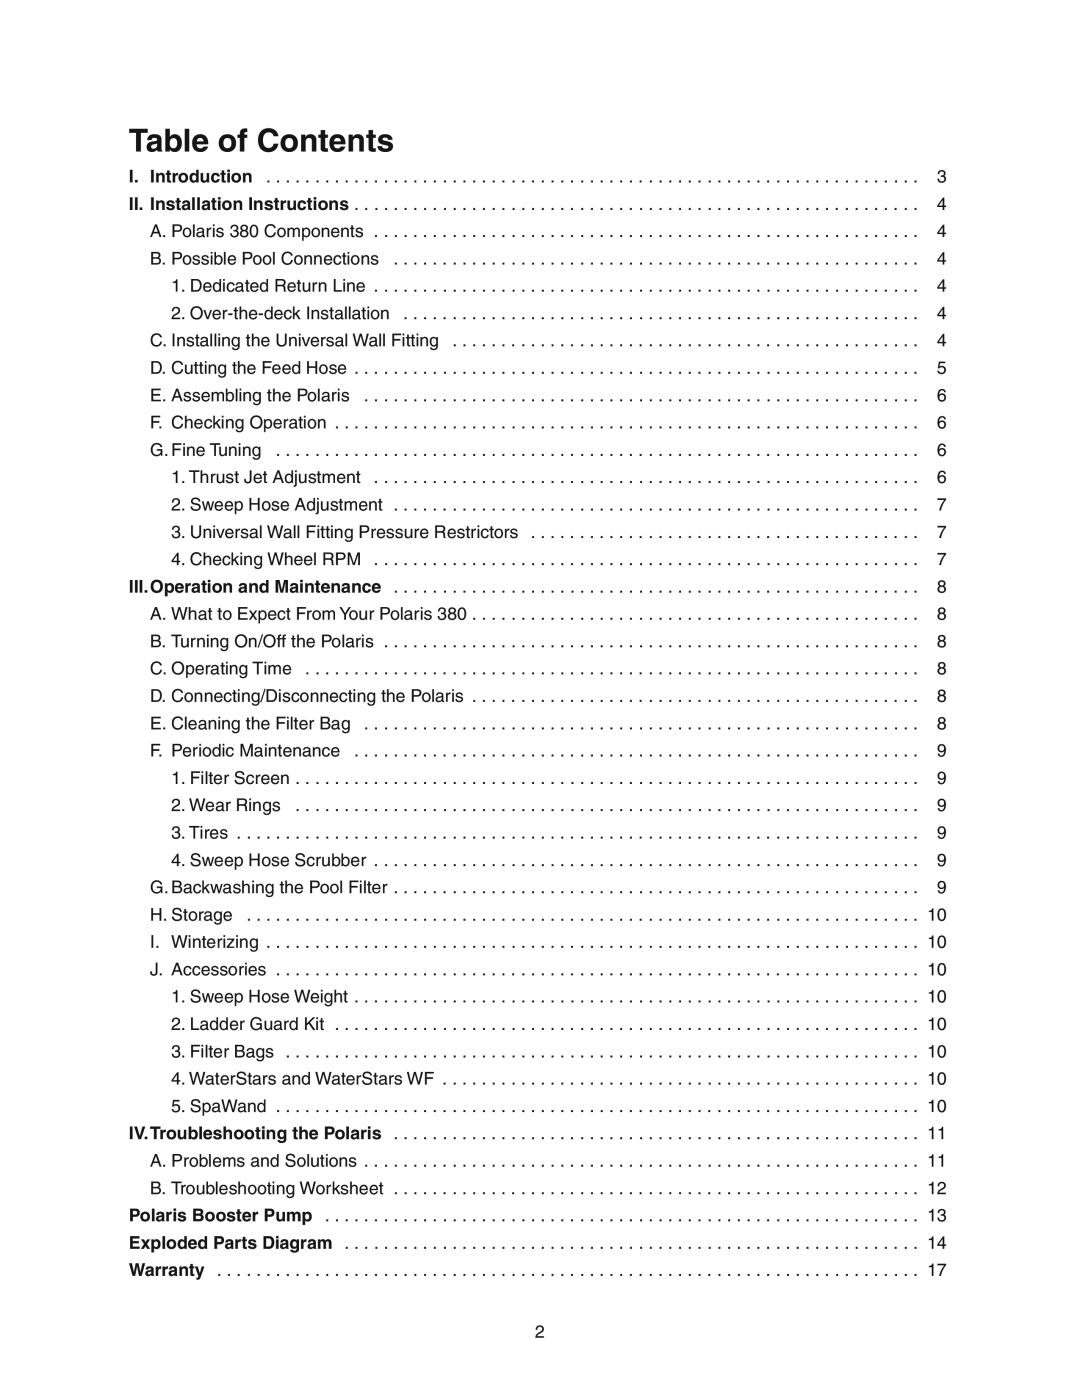 Polaris 380 owner manual Table of Contents 